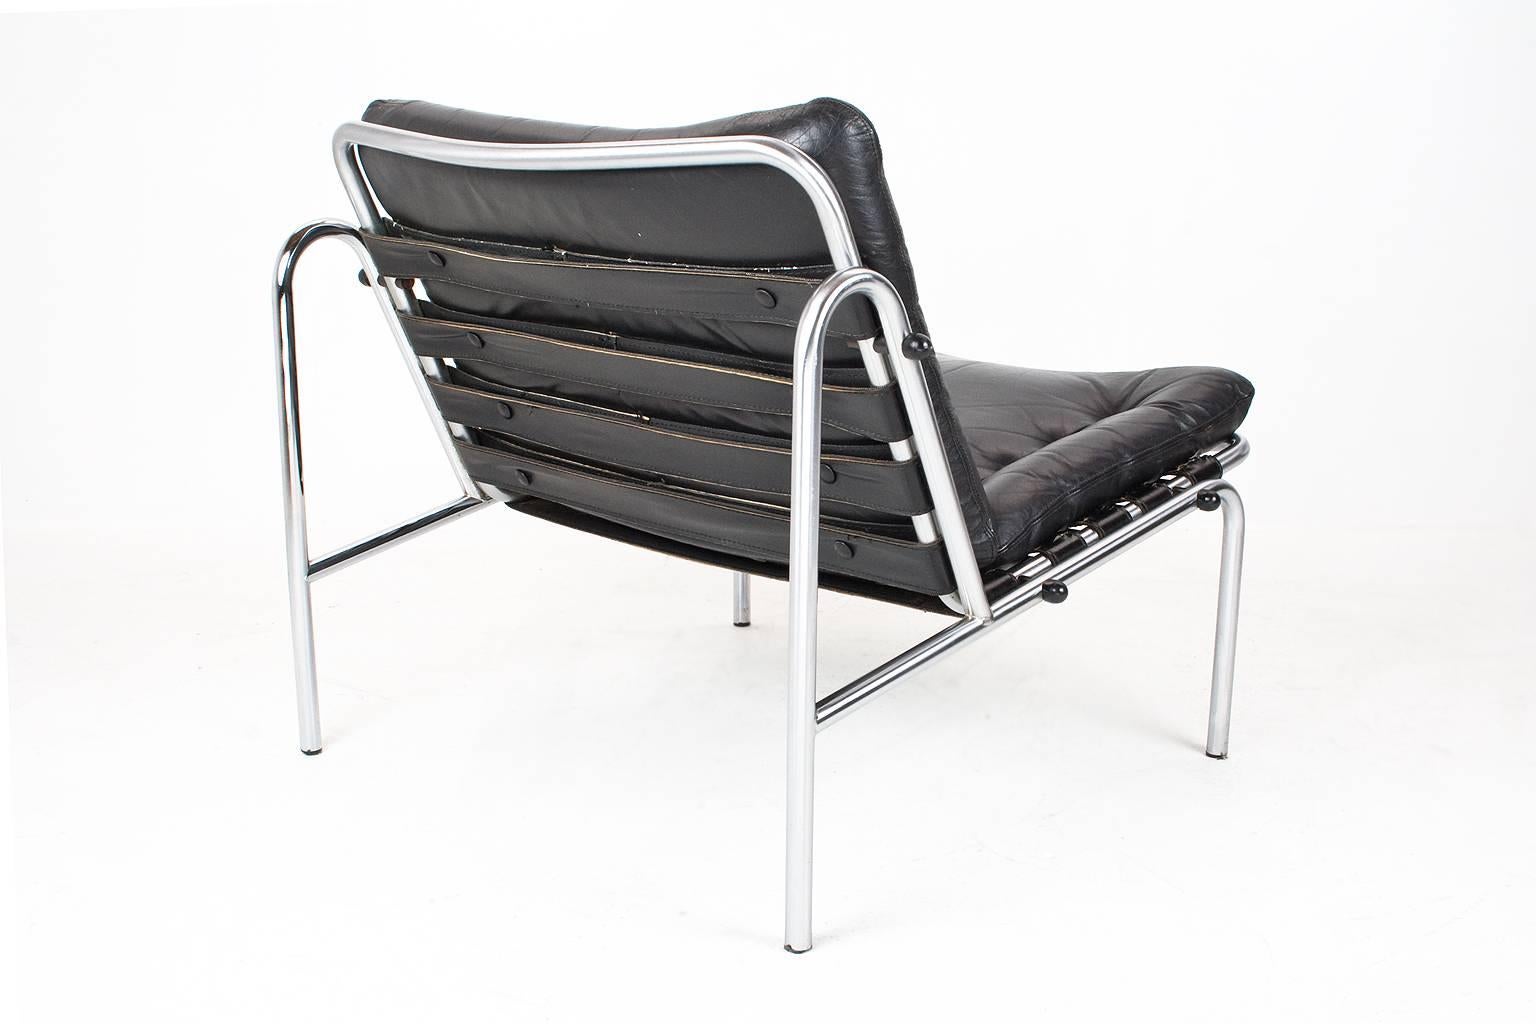 Original and beautiful set of black leather lounge chairs, model Kyoto, designed in 1969 by Martin Visser as part of the Osaka series for the world fair in Japan (Osaka); and part of the Spectrum collection from 1969-1974, midcentury Dutch design.